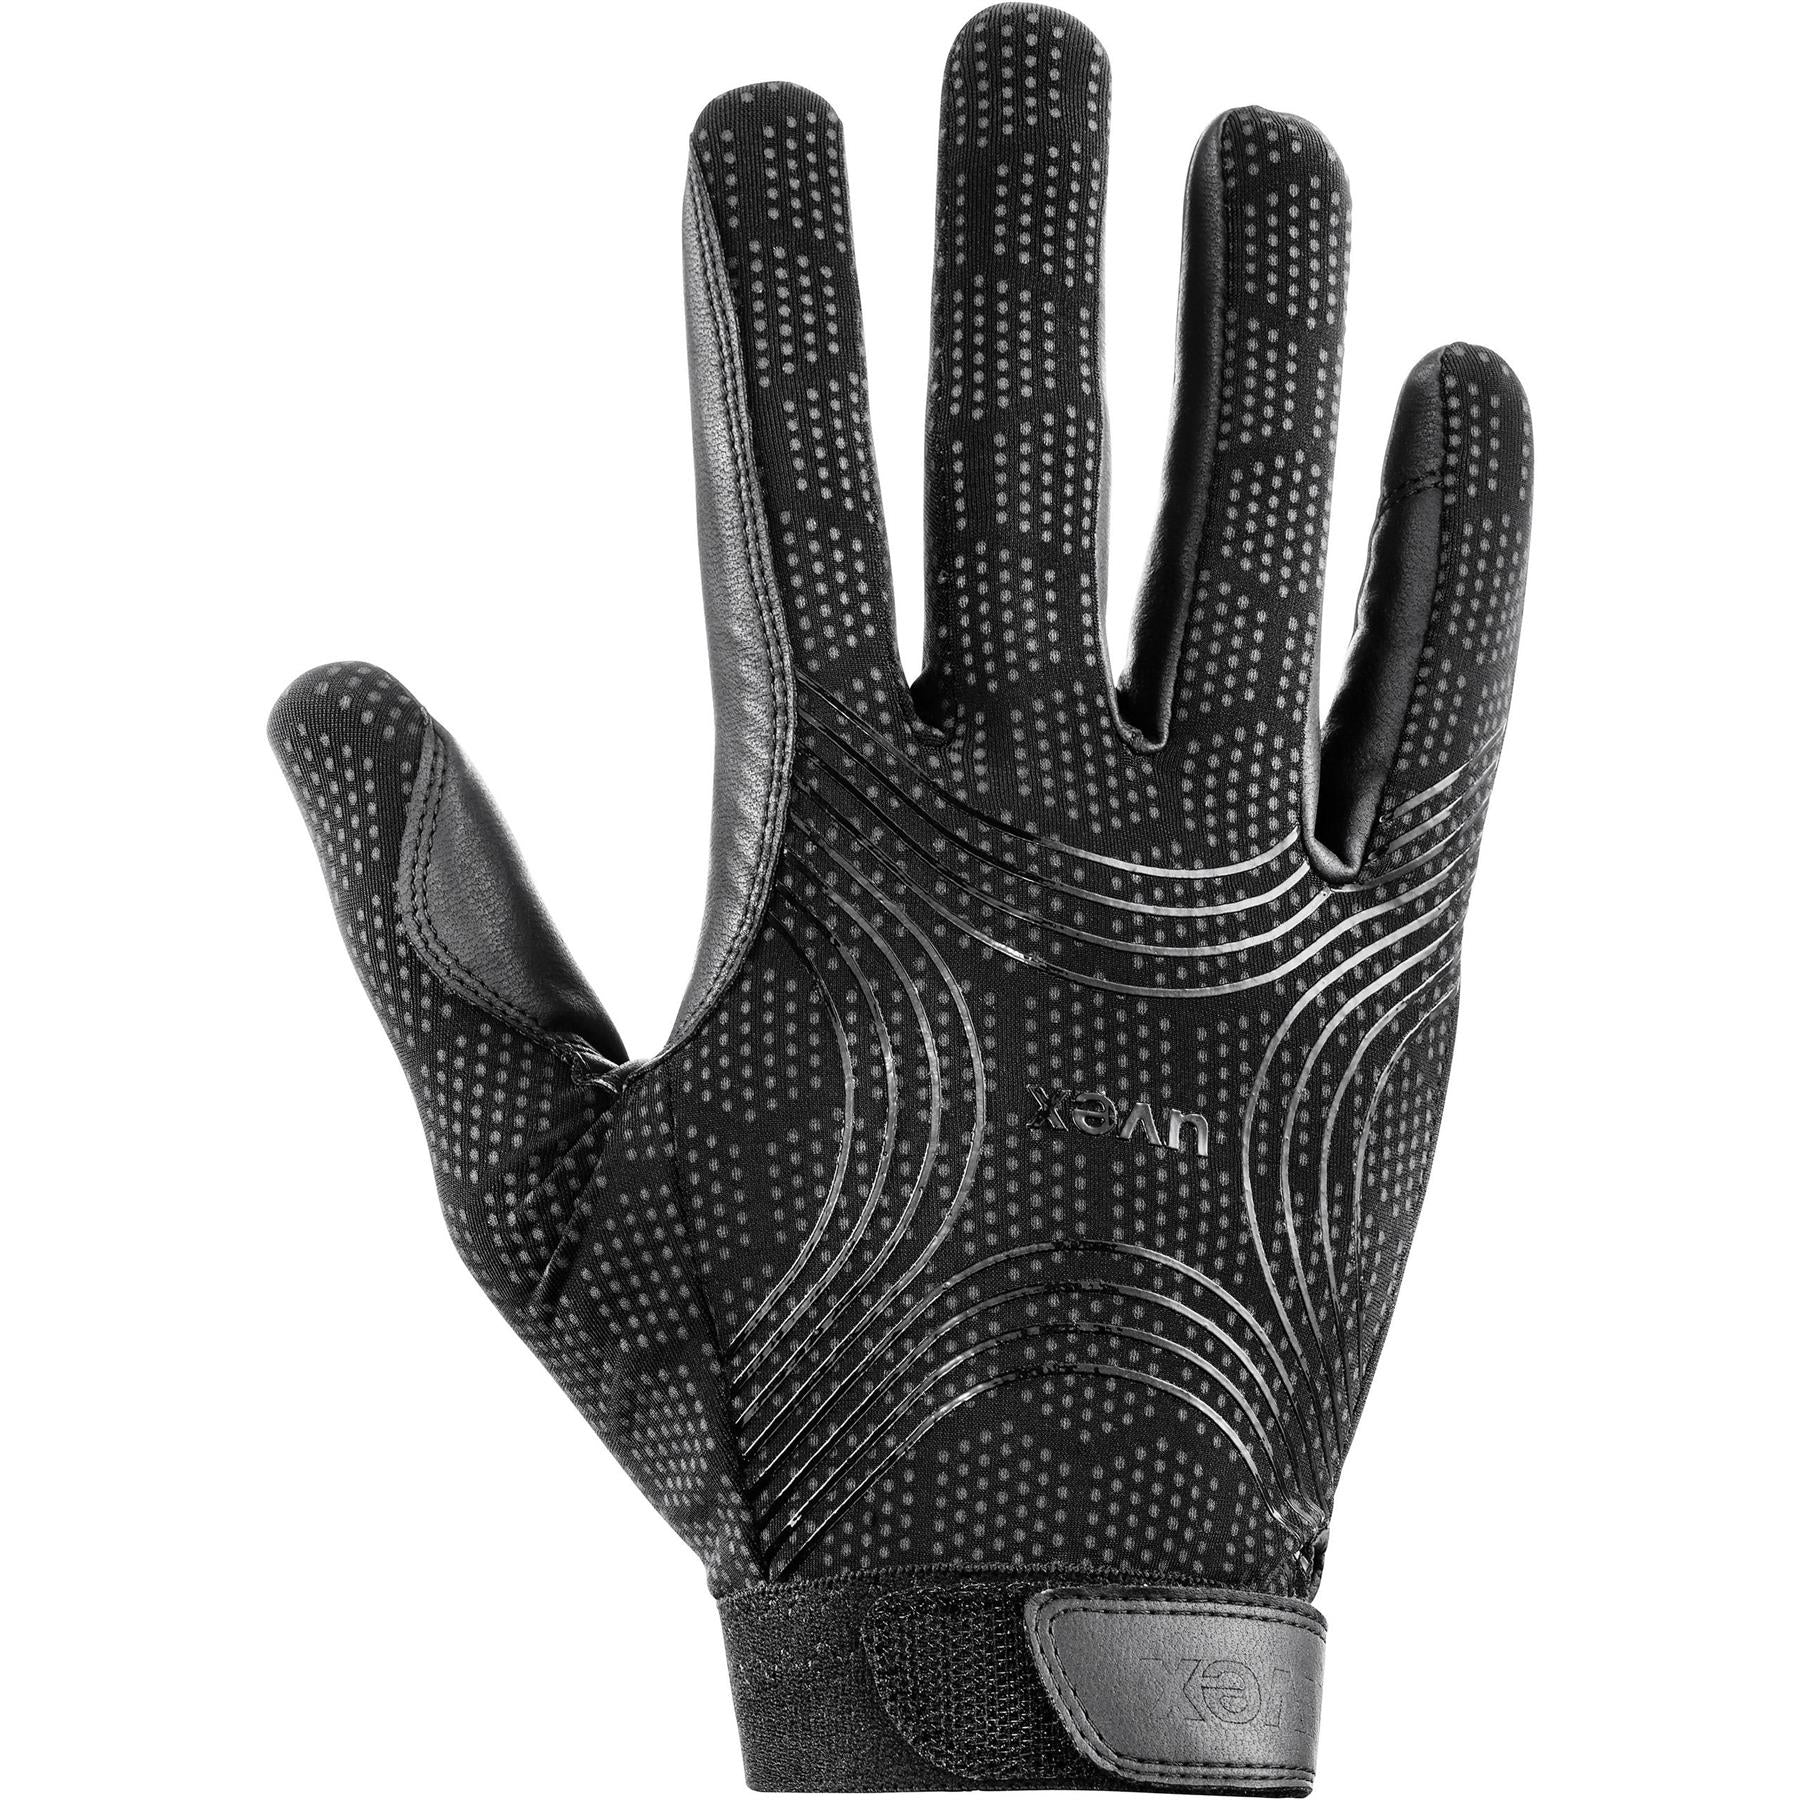 Uvex Ceravent Horse Riding Gloves - Just Horse Riders